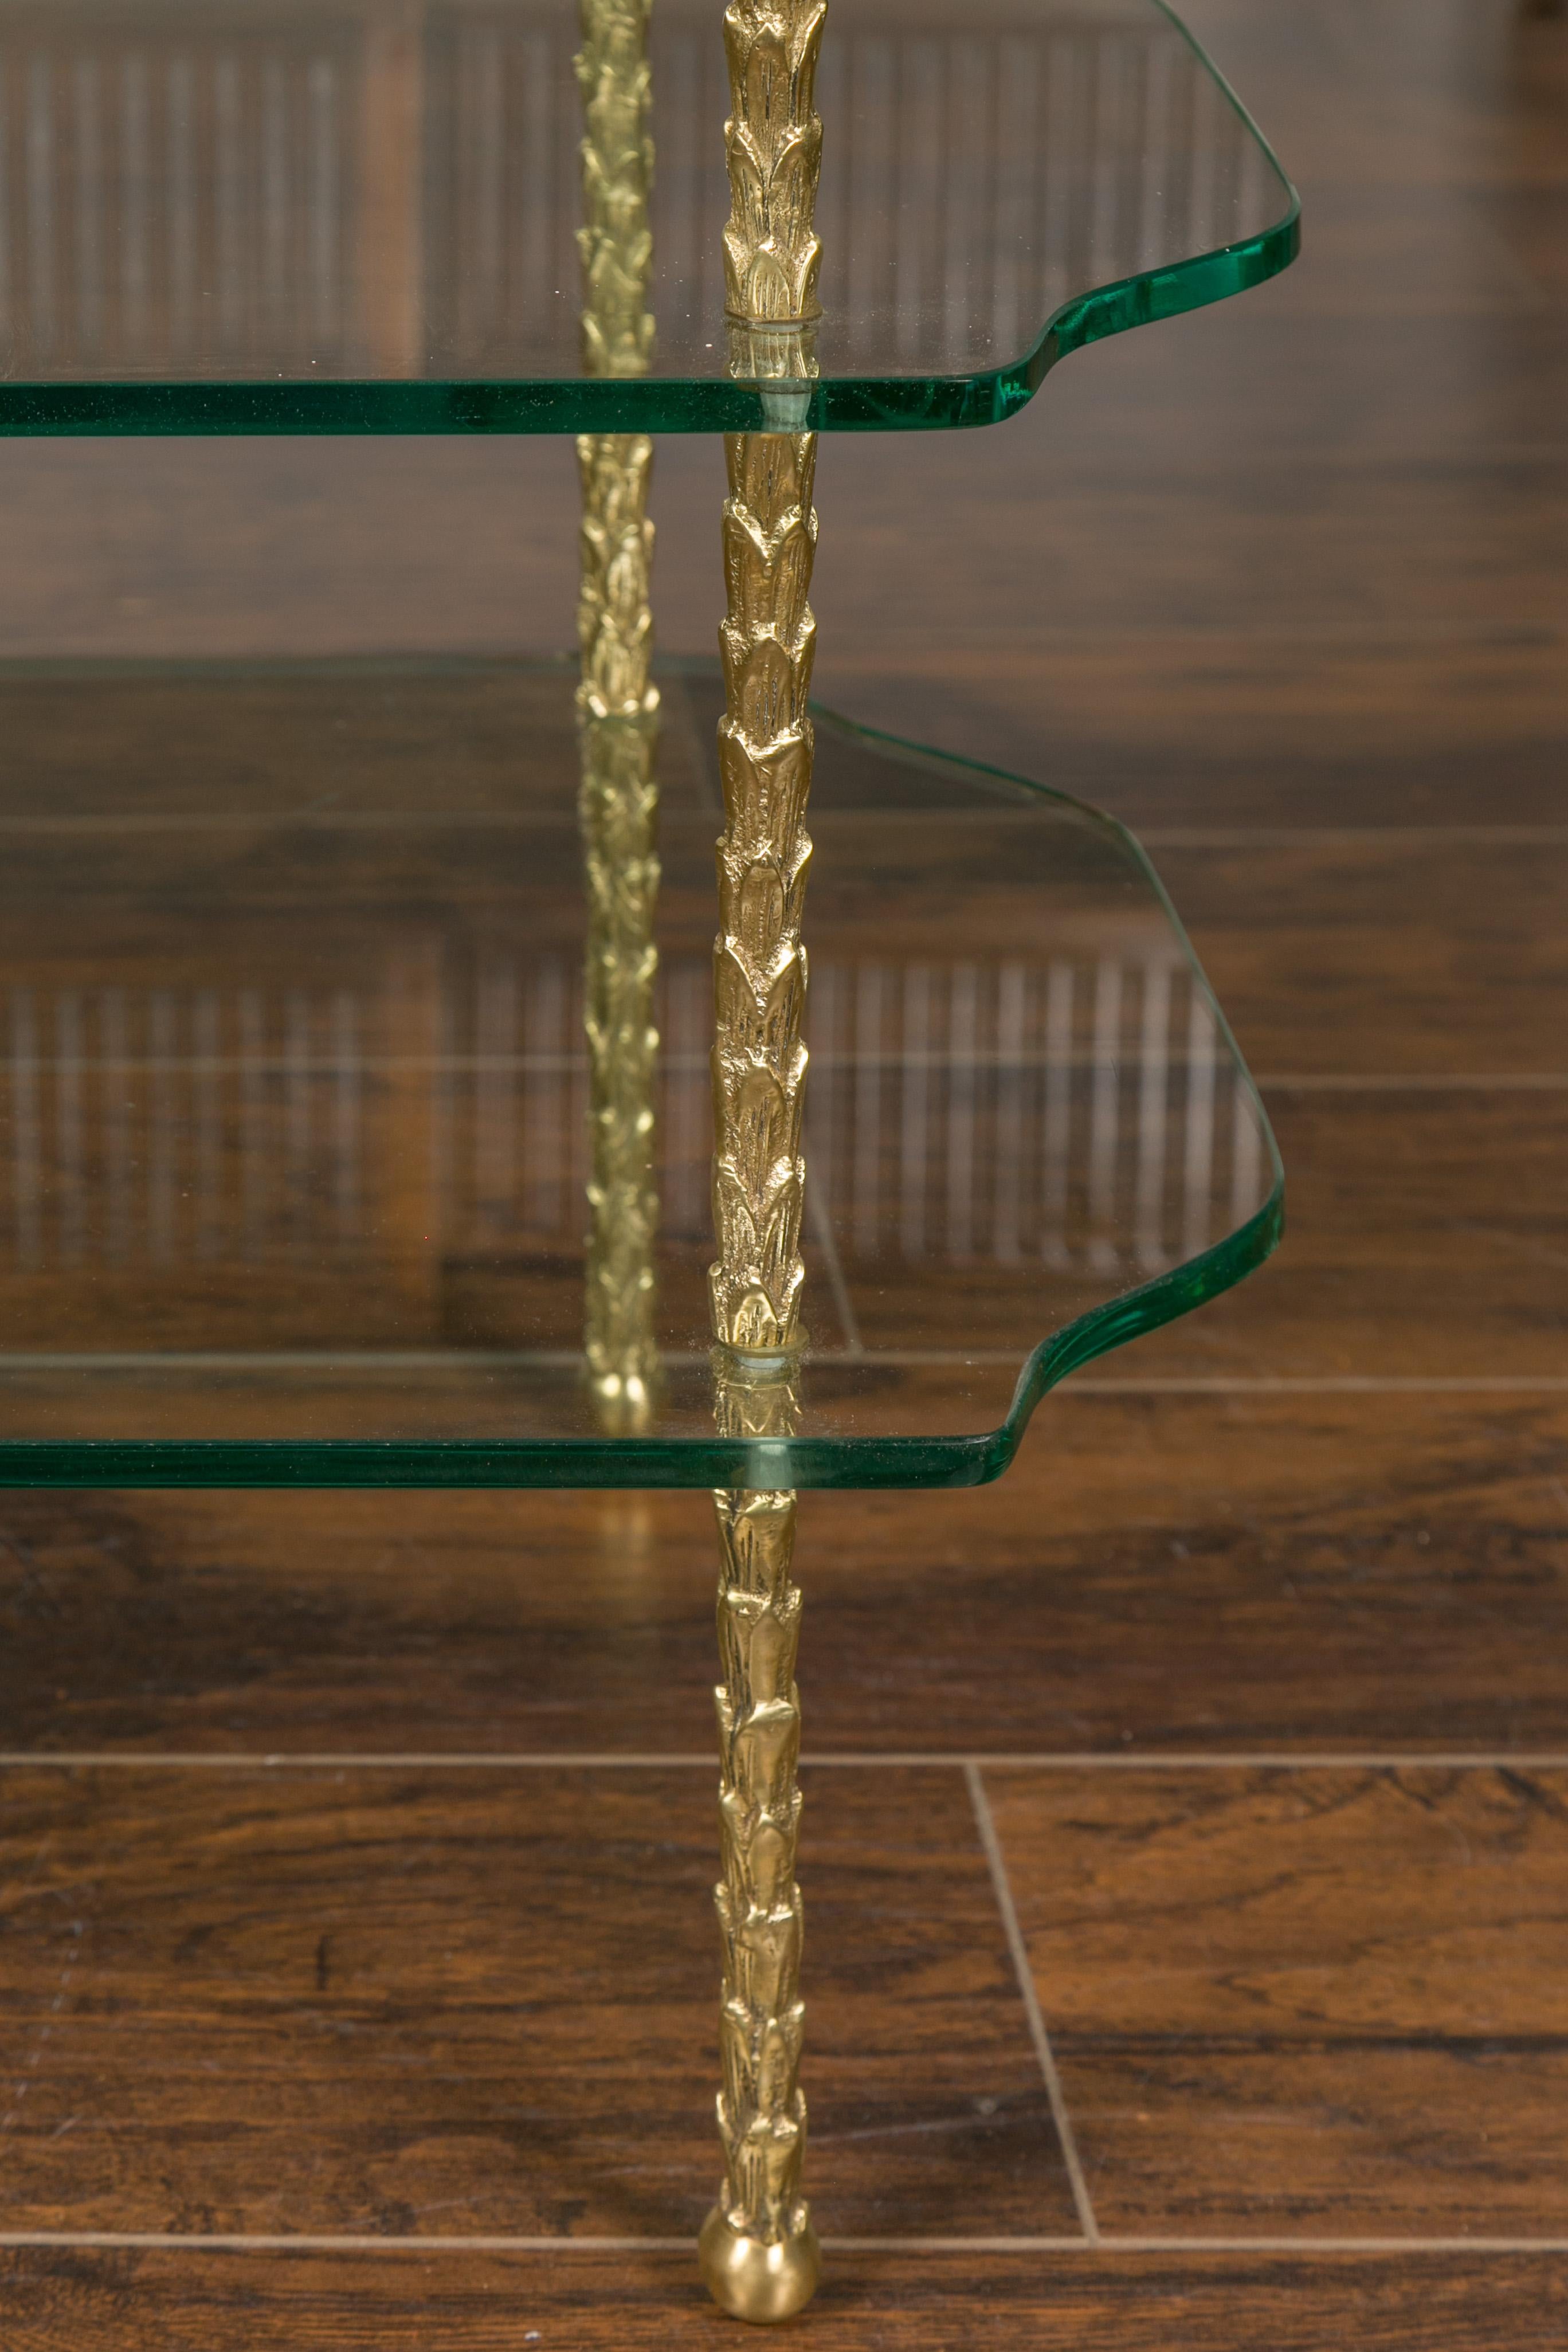 Midcentury Brass Three-Tiered Table with Glass Shelves and Foliage Motifs For Sale 2